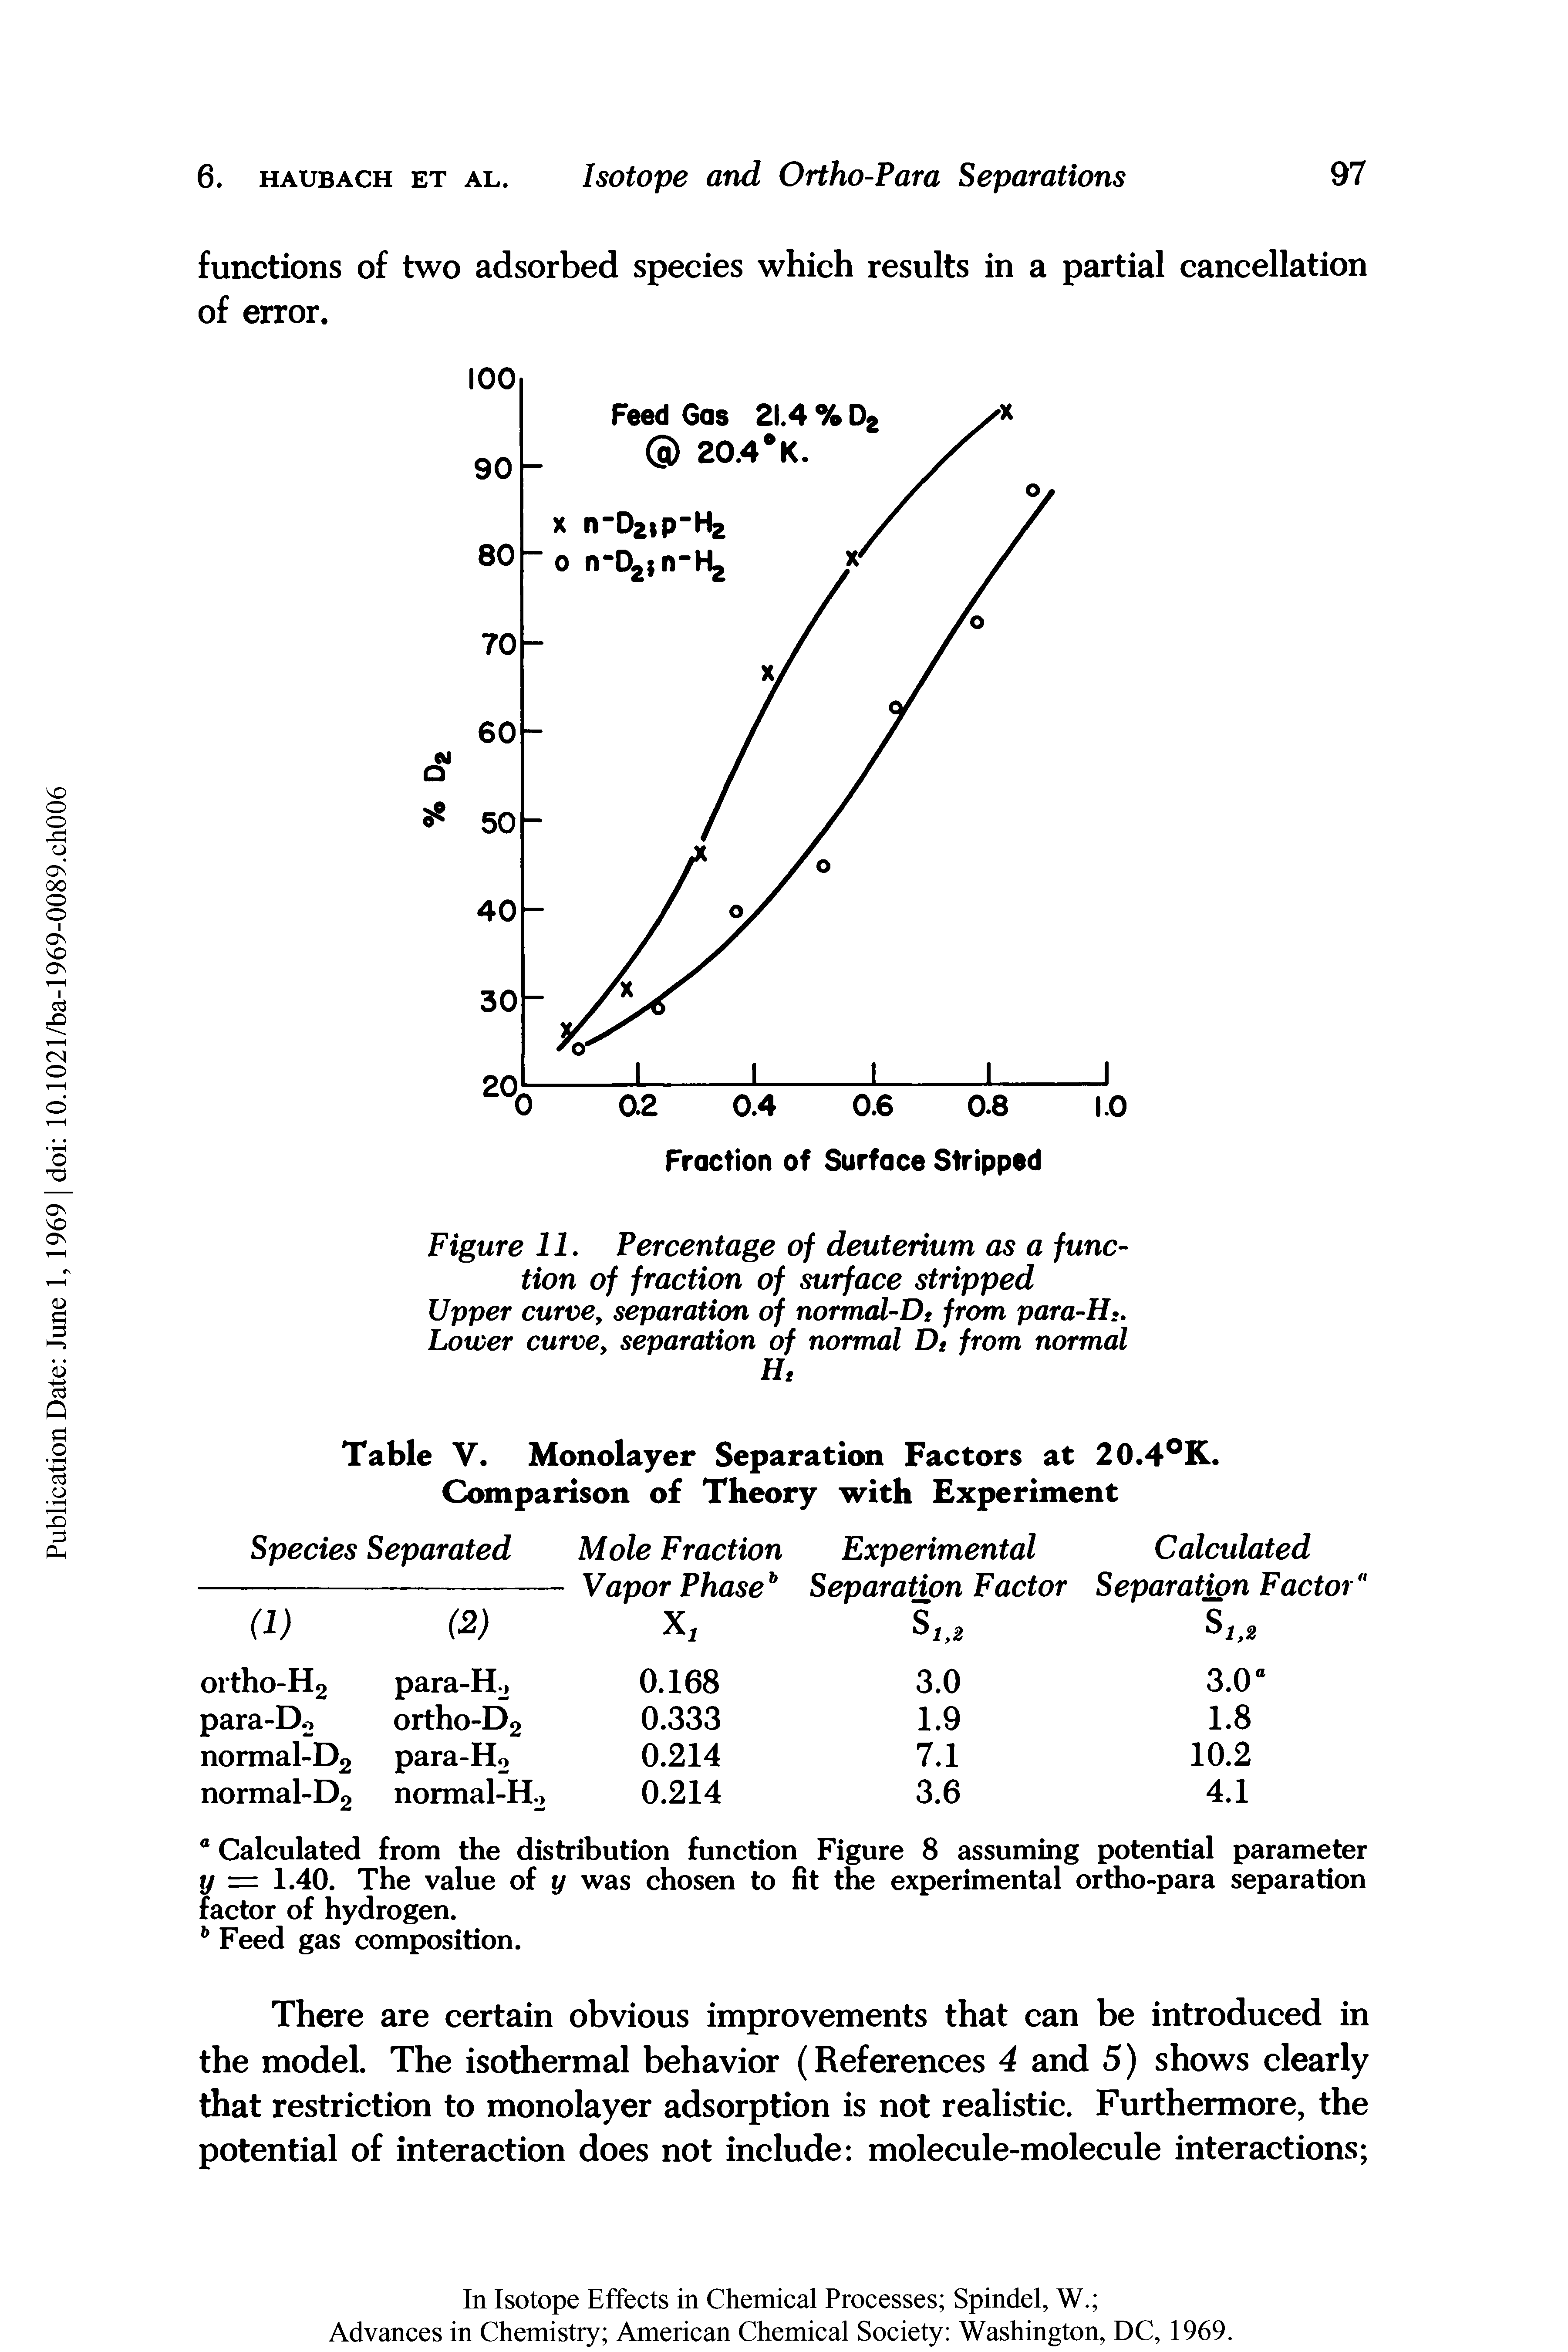 Table V. Monolayer Separation Factors at 20.4 K. Comparison of Theory with Experiment...